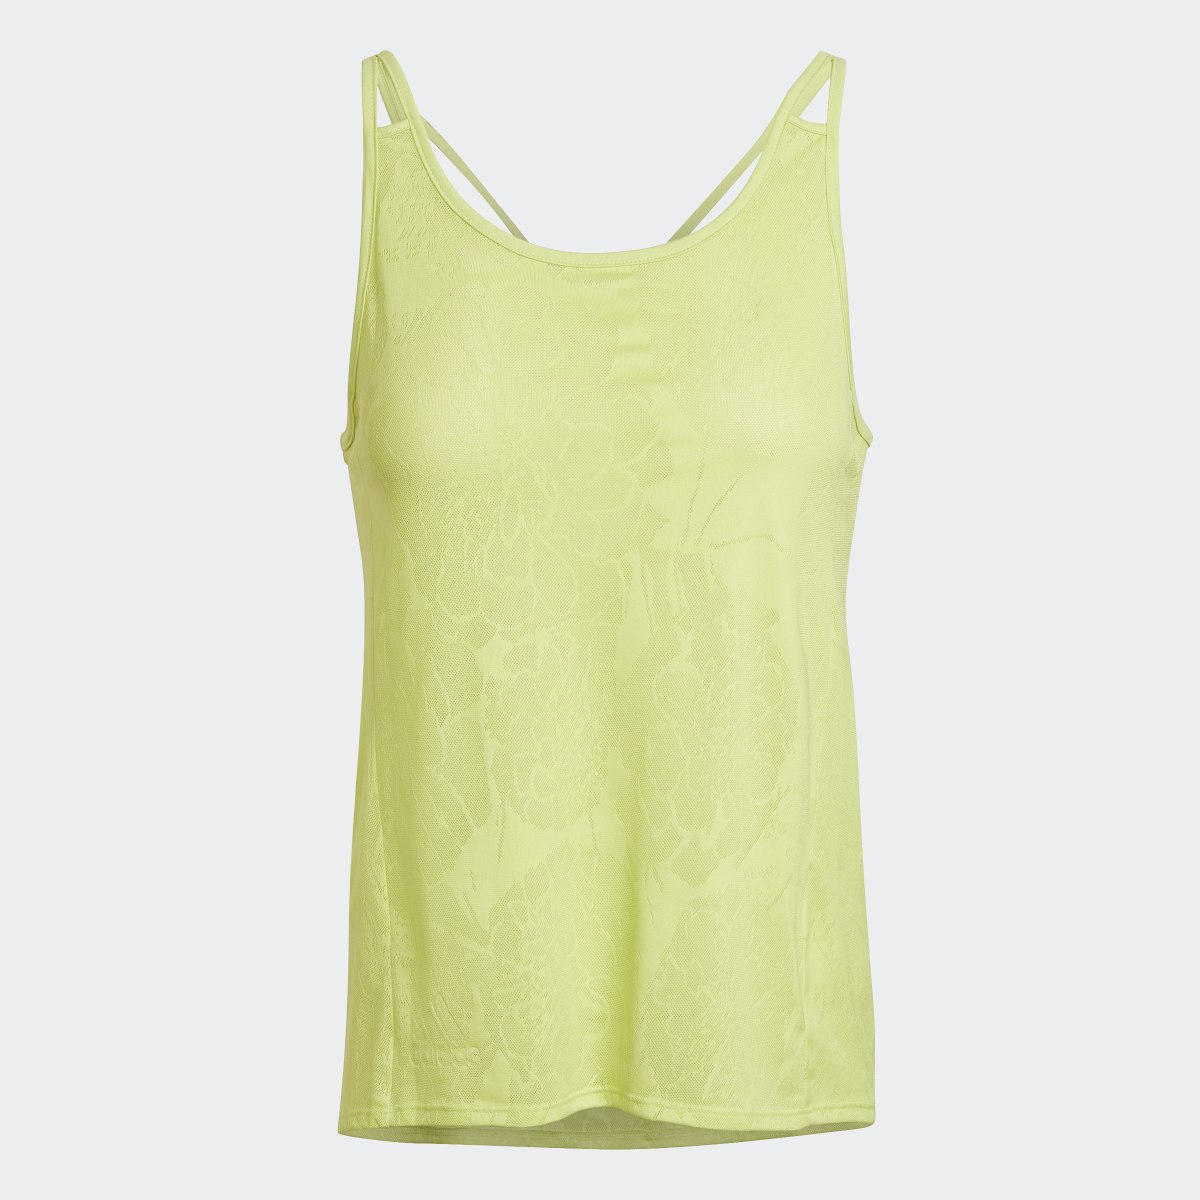 Adidas Made To Be Remade Running Tank Top. 5